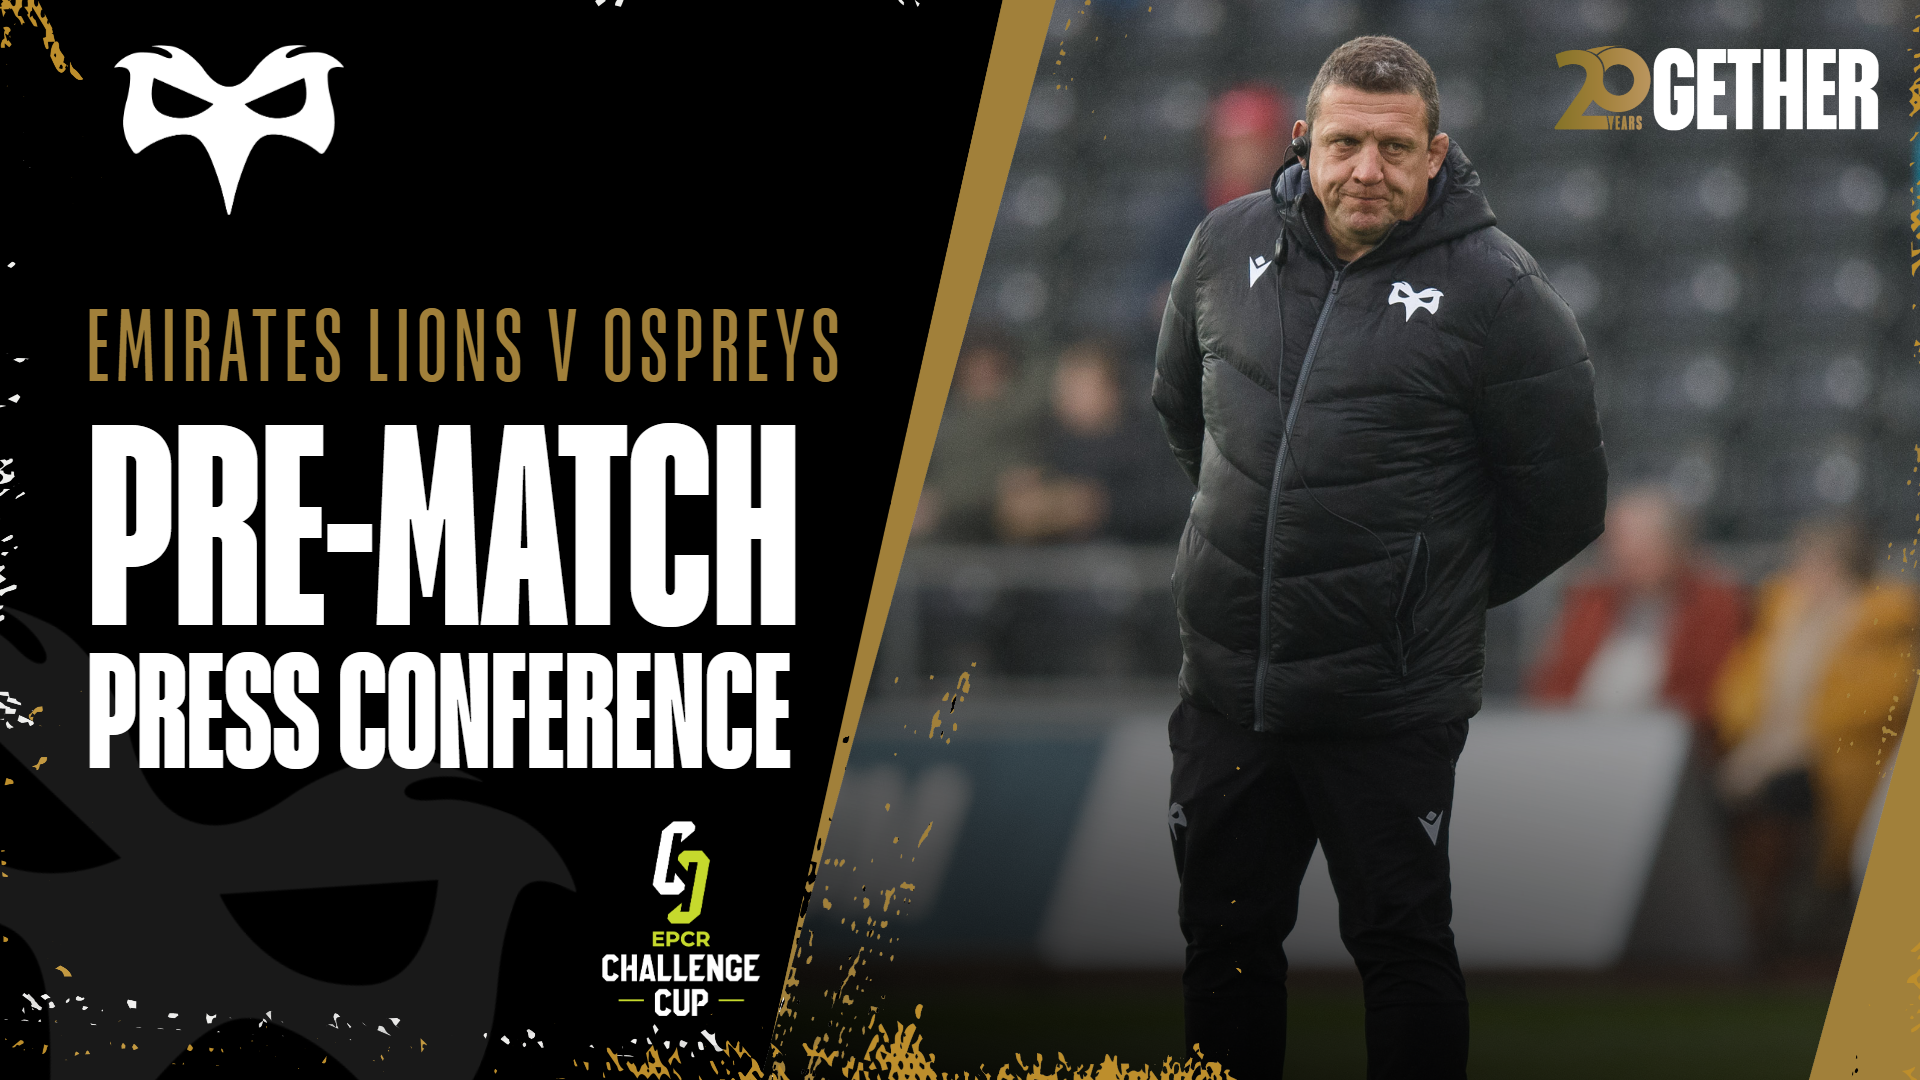 EPCR Challenge Cup Pre-match Press Conference: Toby Booth (Vs Emirates Lions)